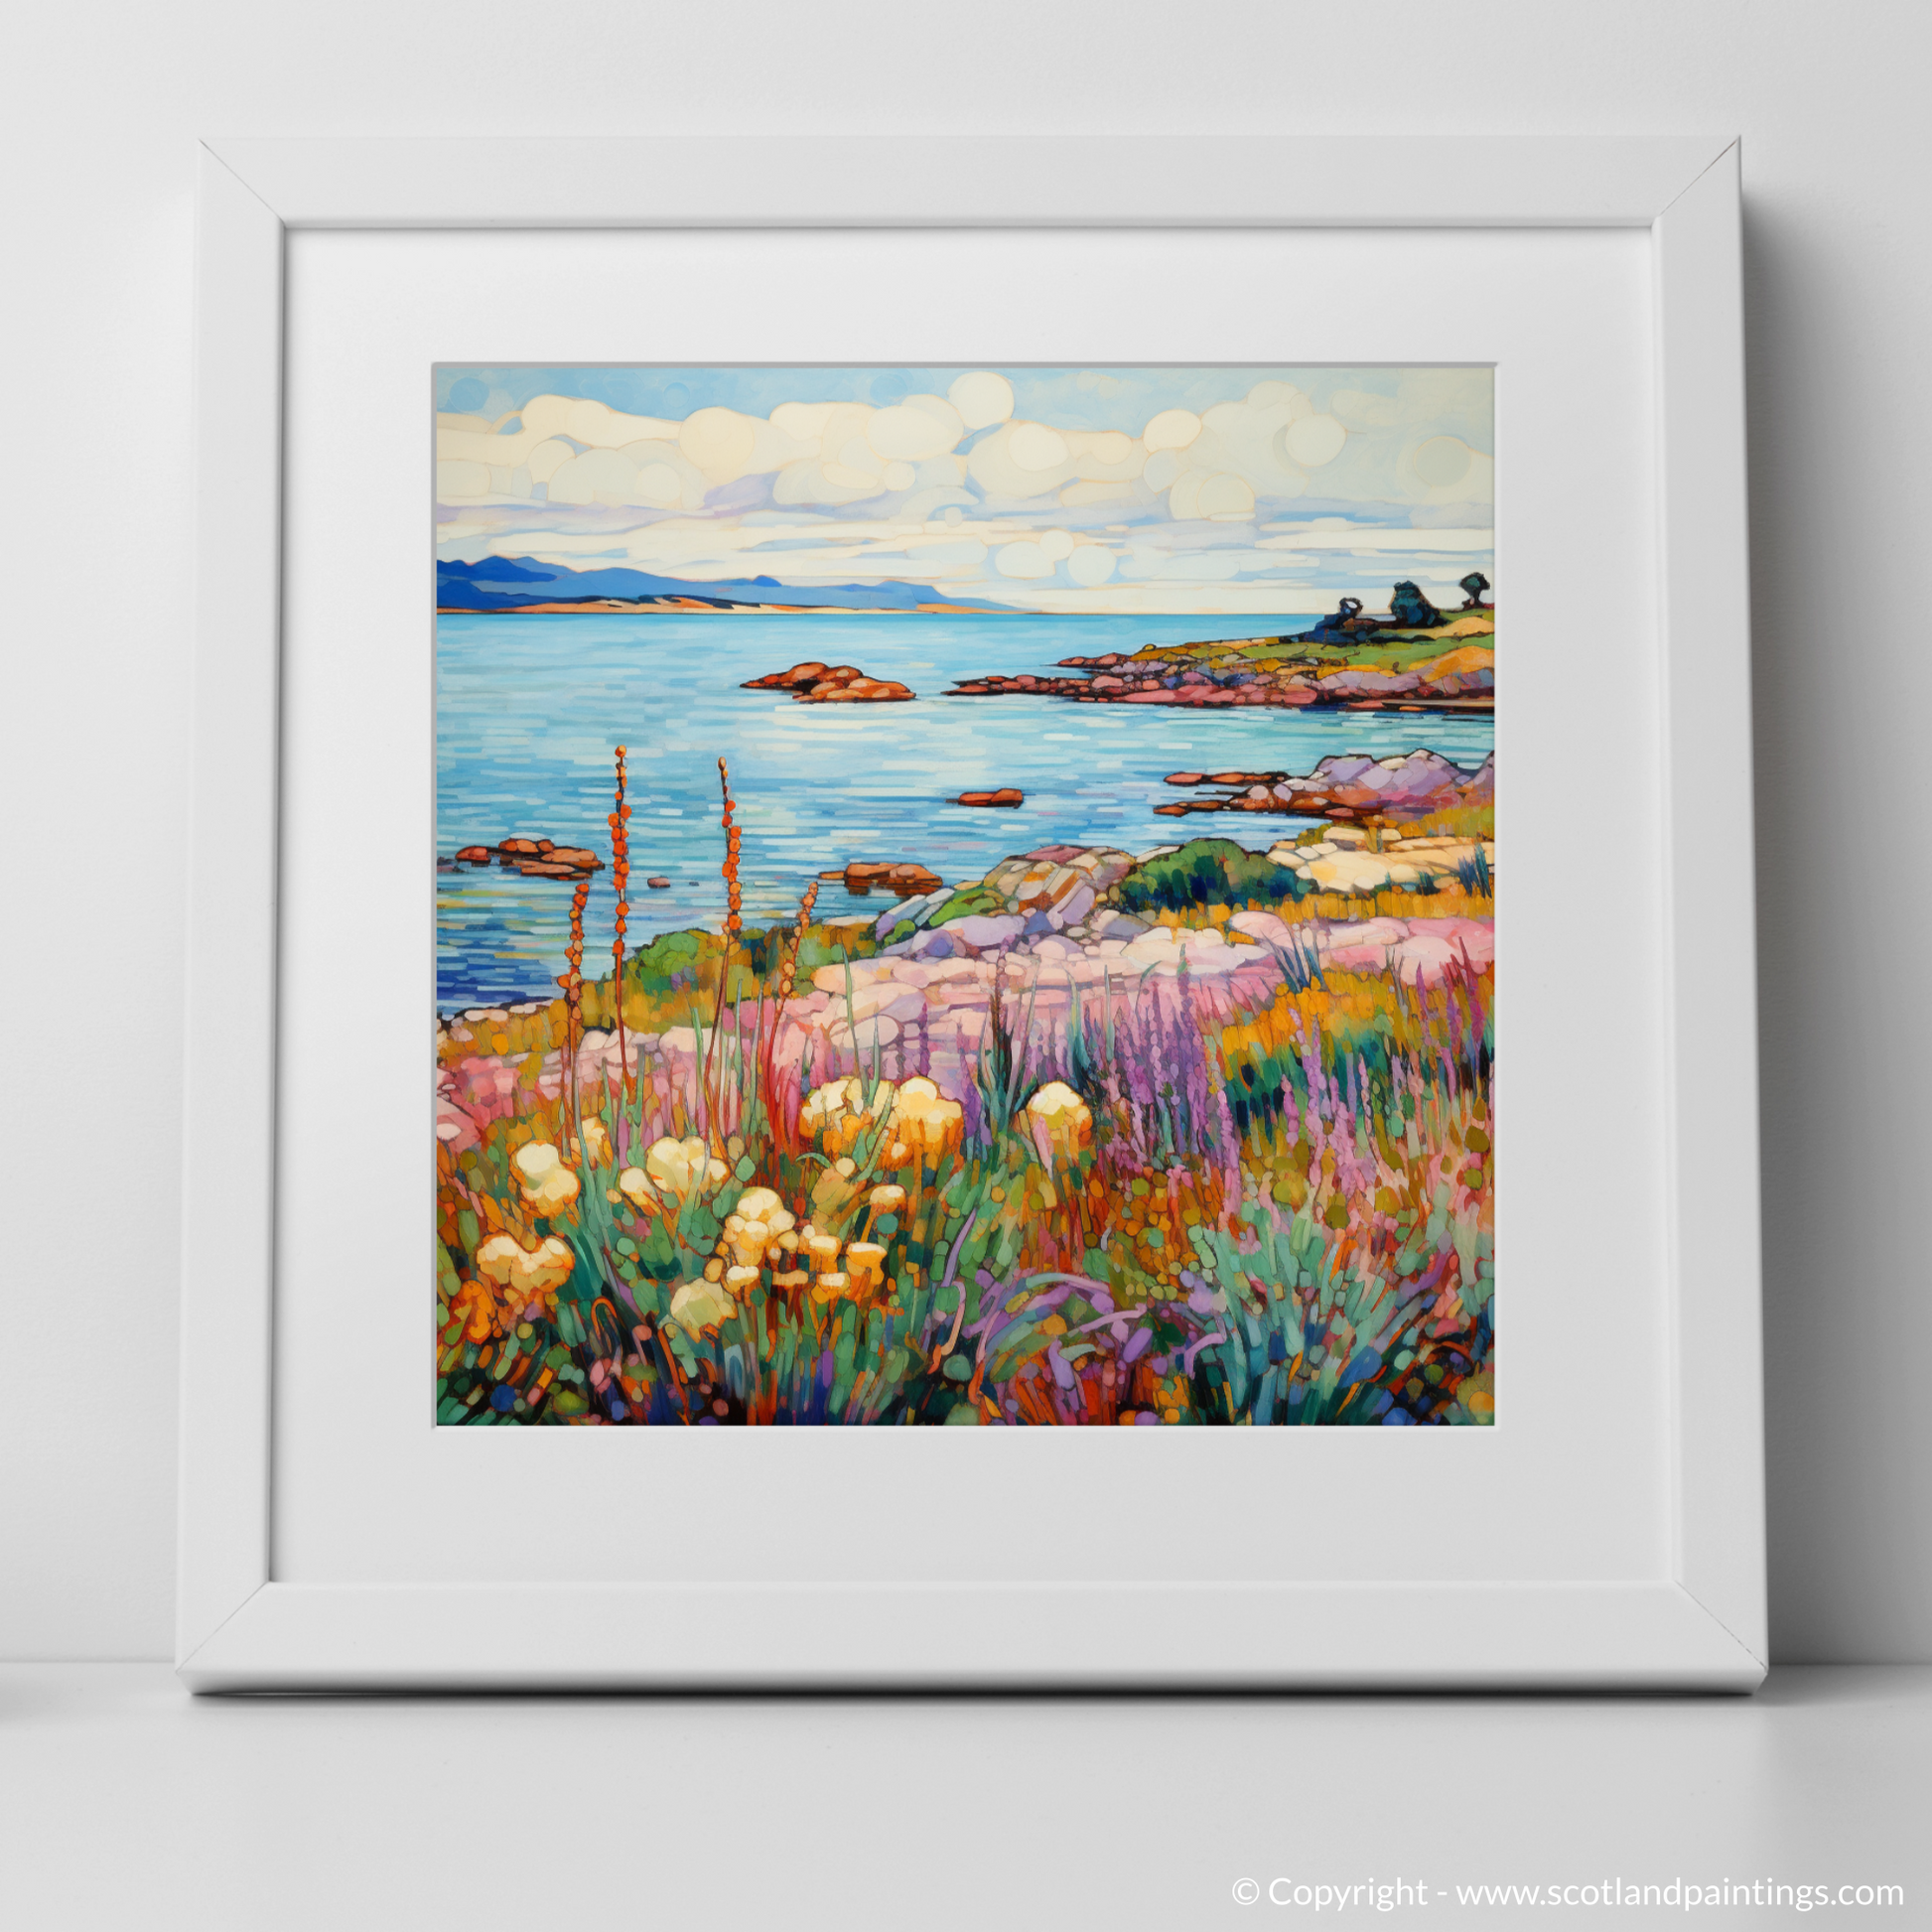 Art Print of Isle of Gigha, Inner Hebrides in summer with a white frame